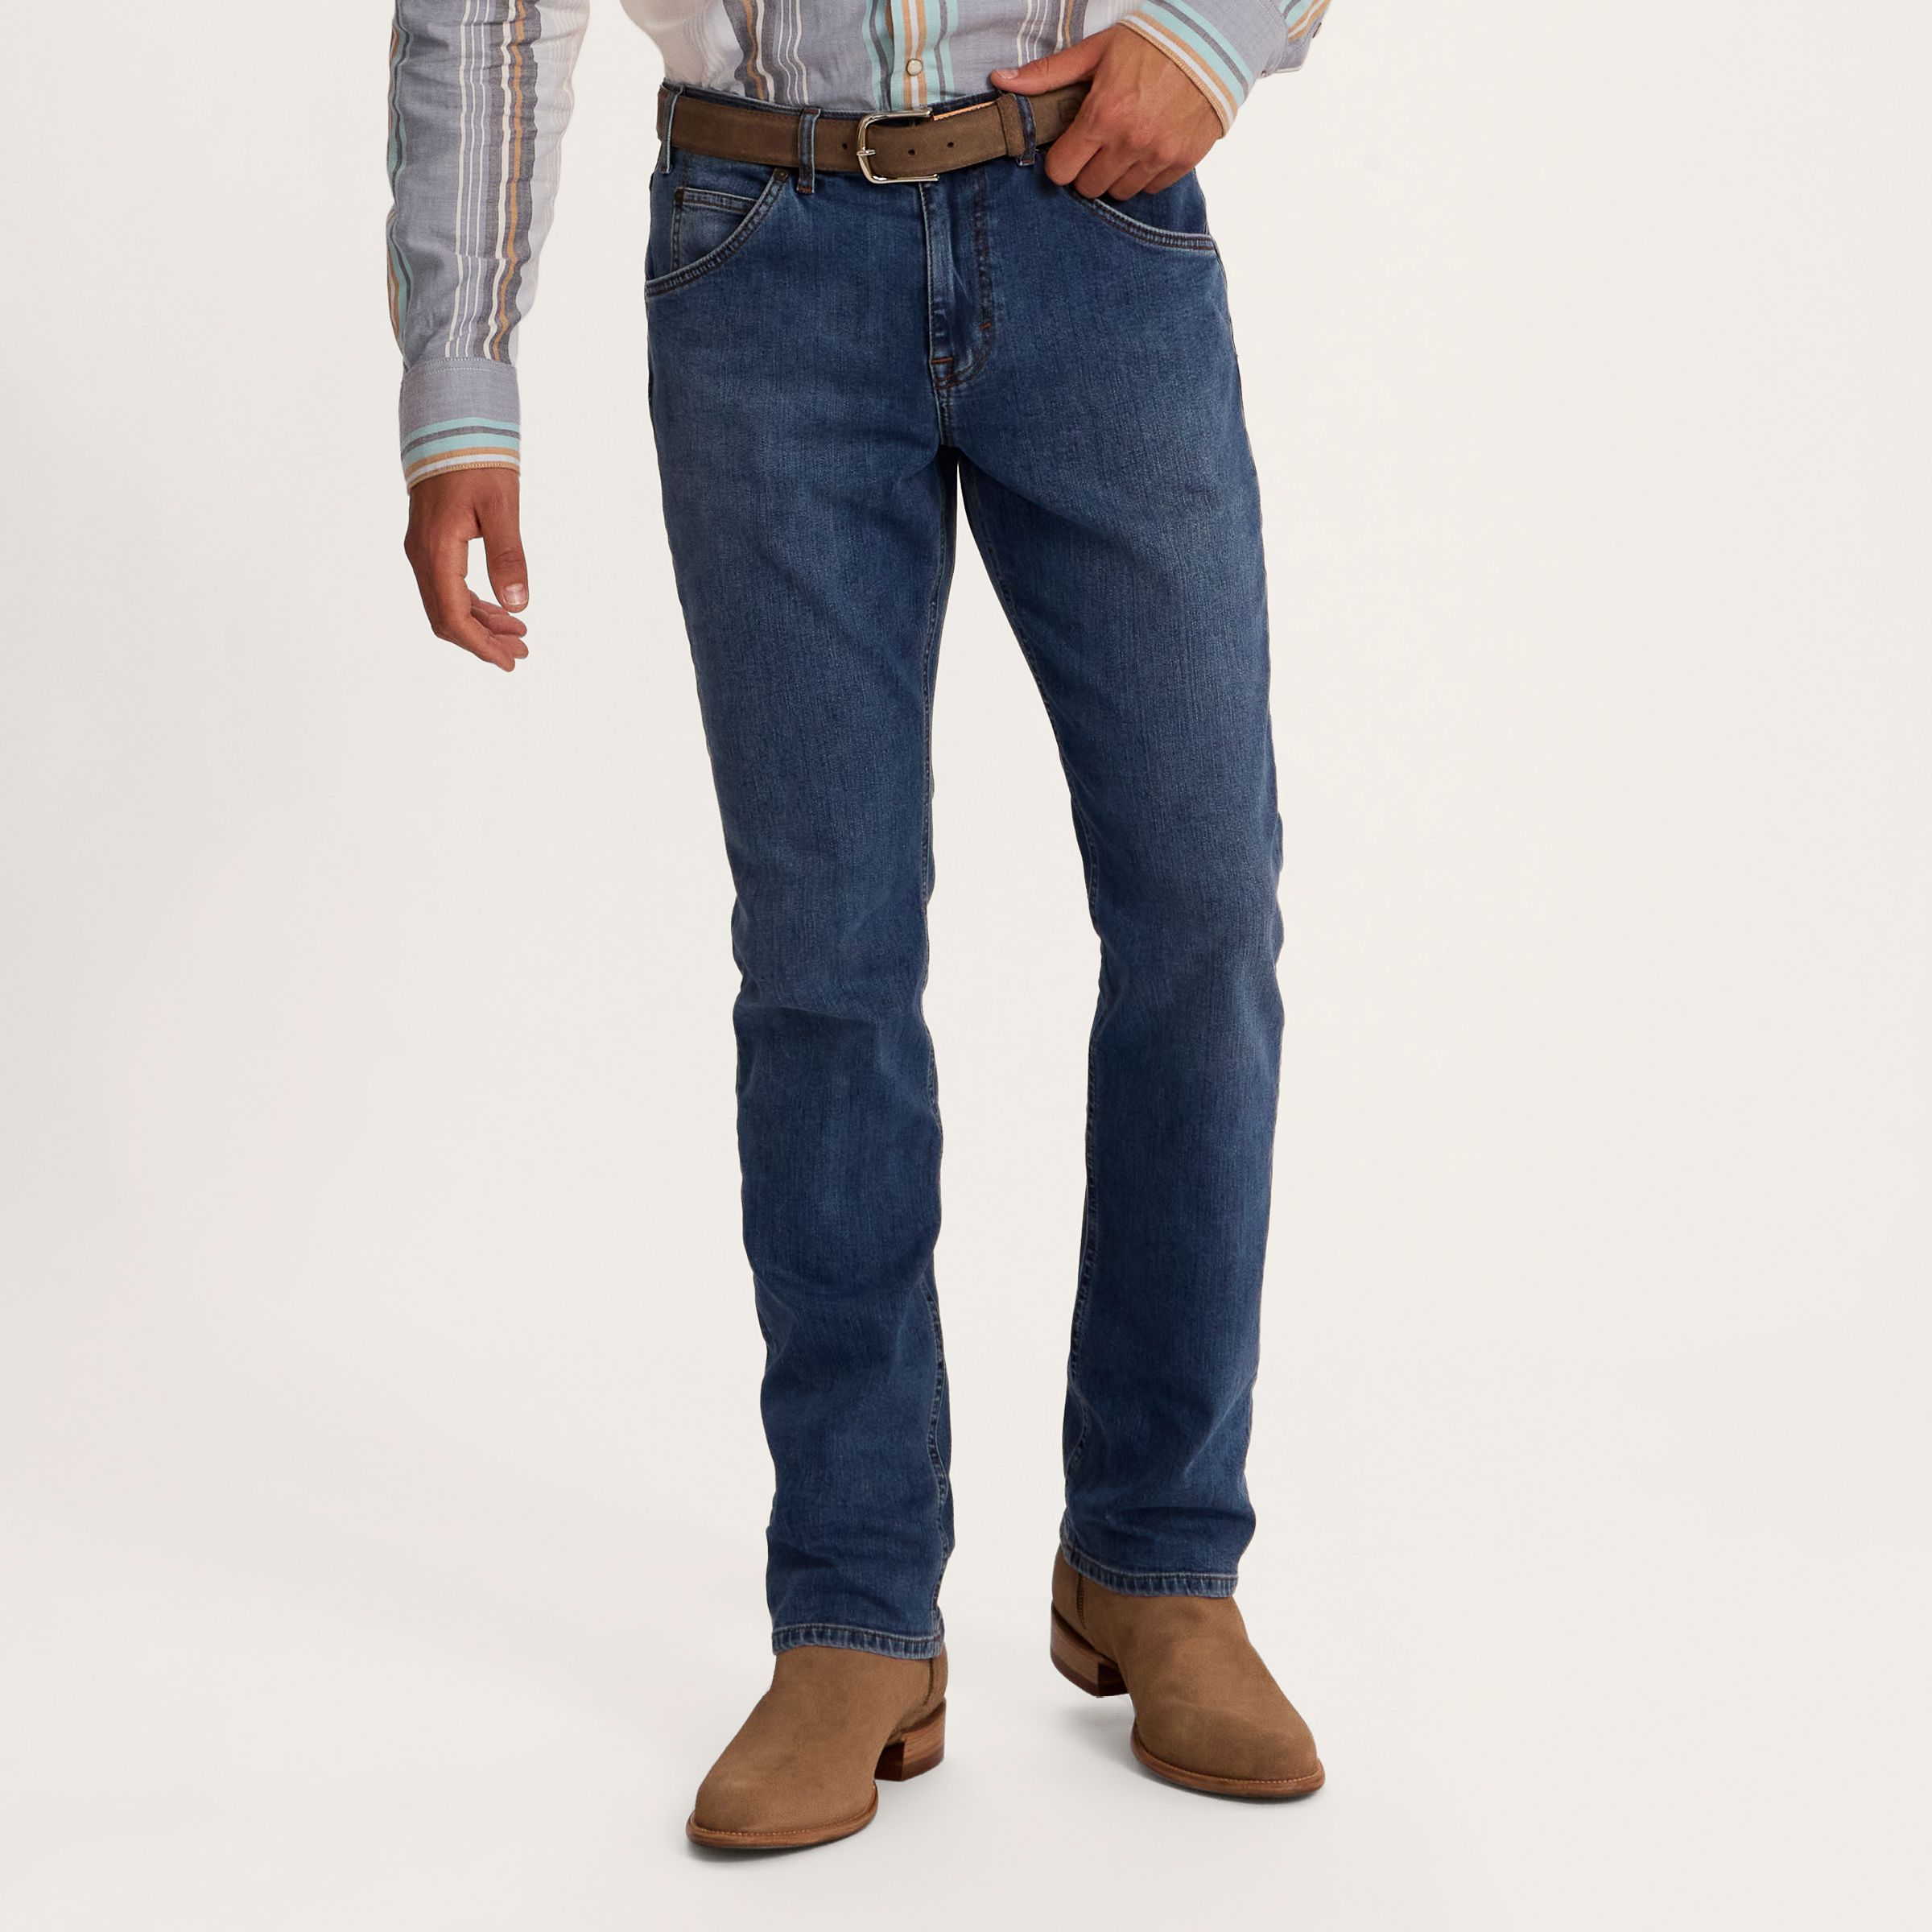 Should You Wear Jeans Tucked into Cowboy Boots? | Ariat